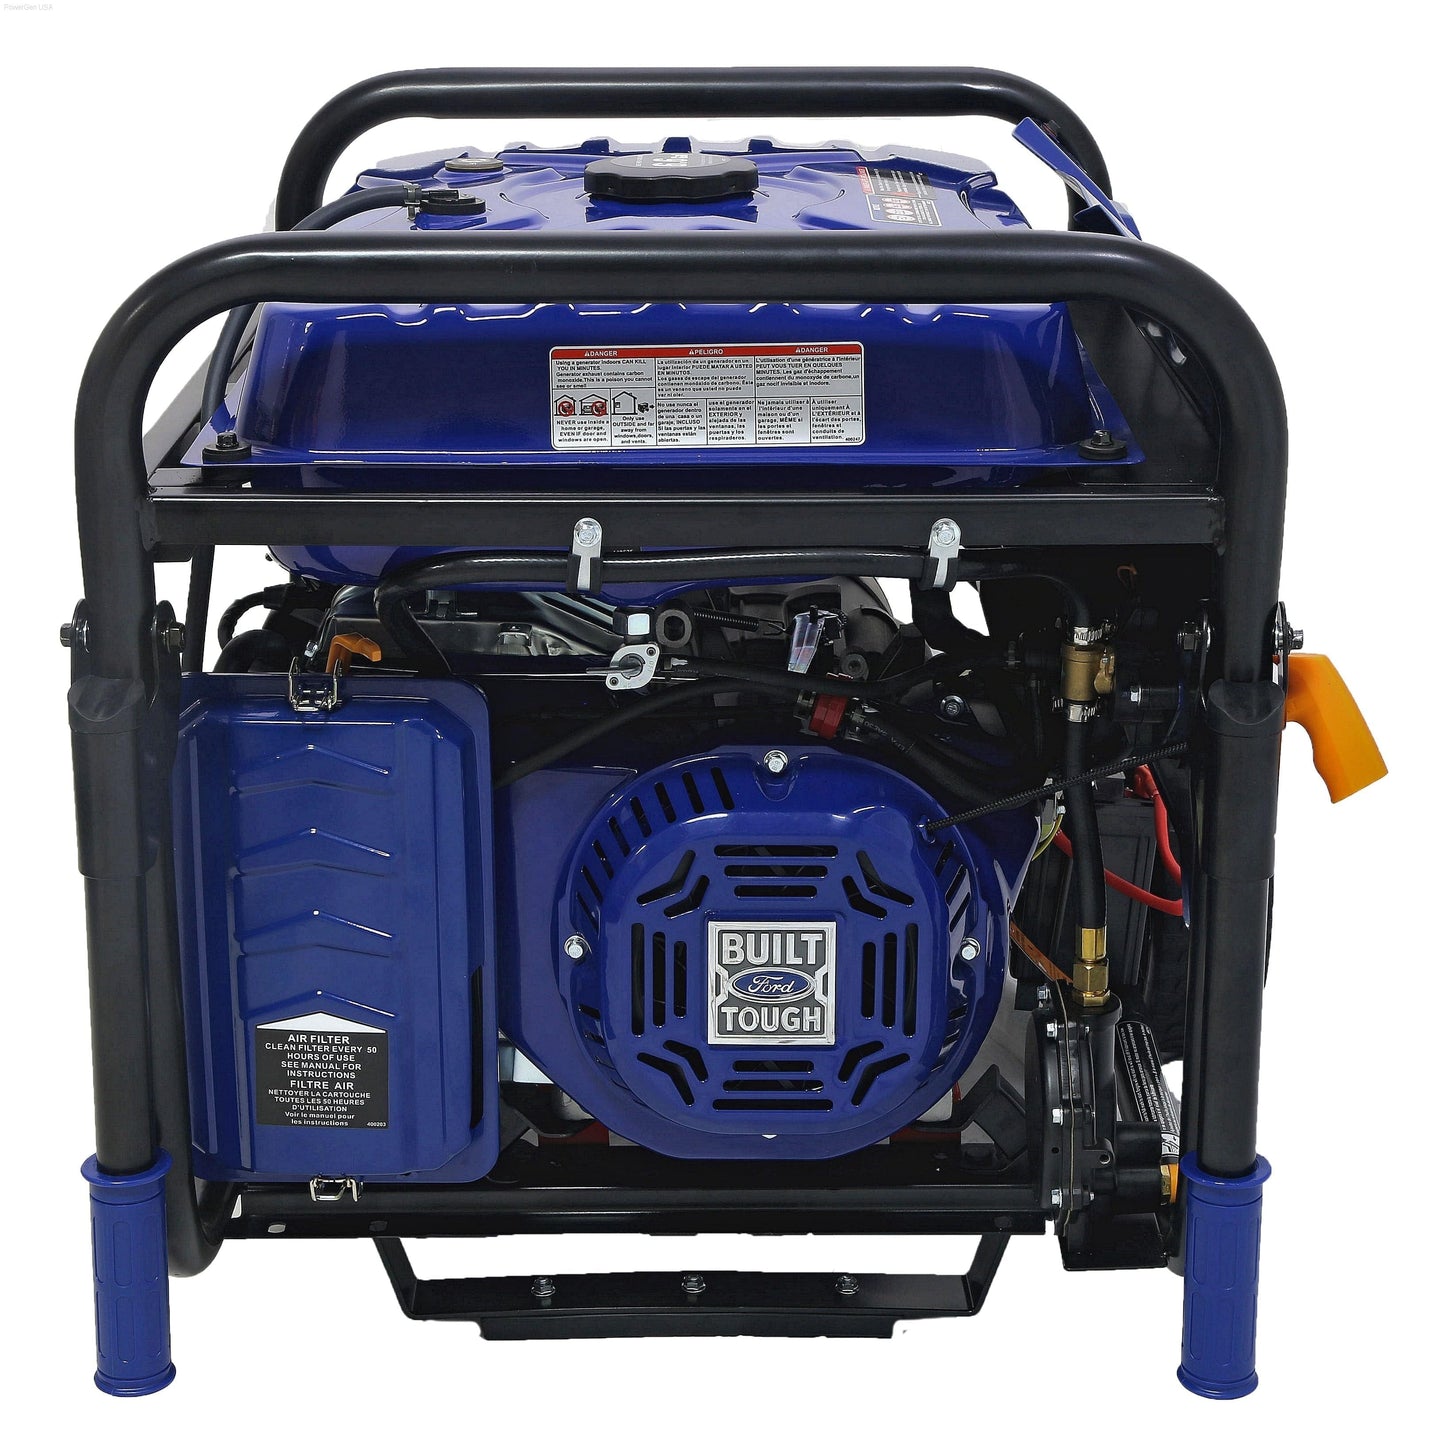 Dual Fuel Hybrid - Ford-FG7750PBE 7,750W Dual Fuel Portable Generator With Switch & Go Technology